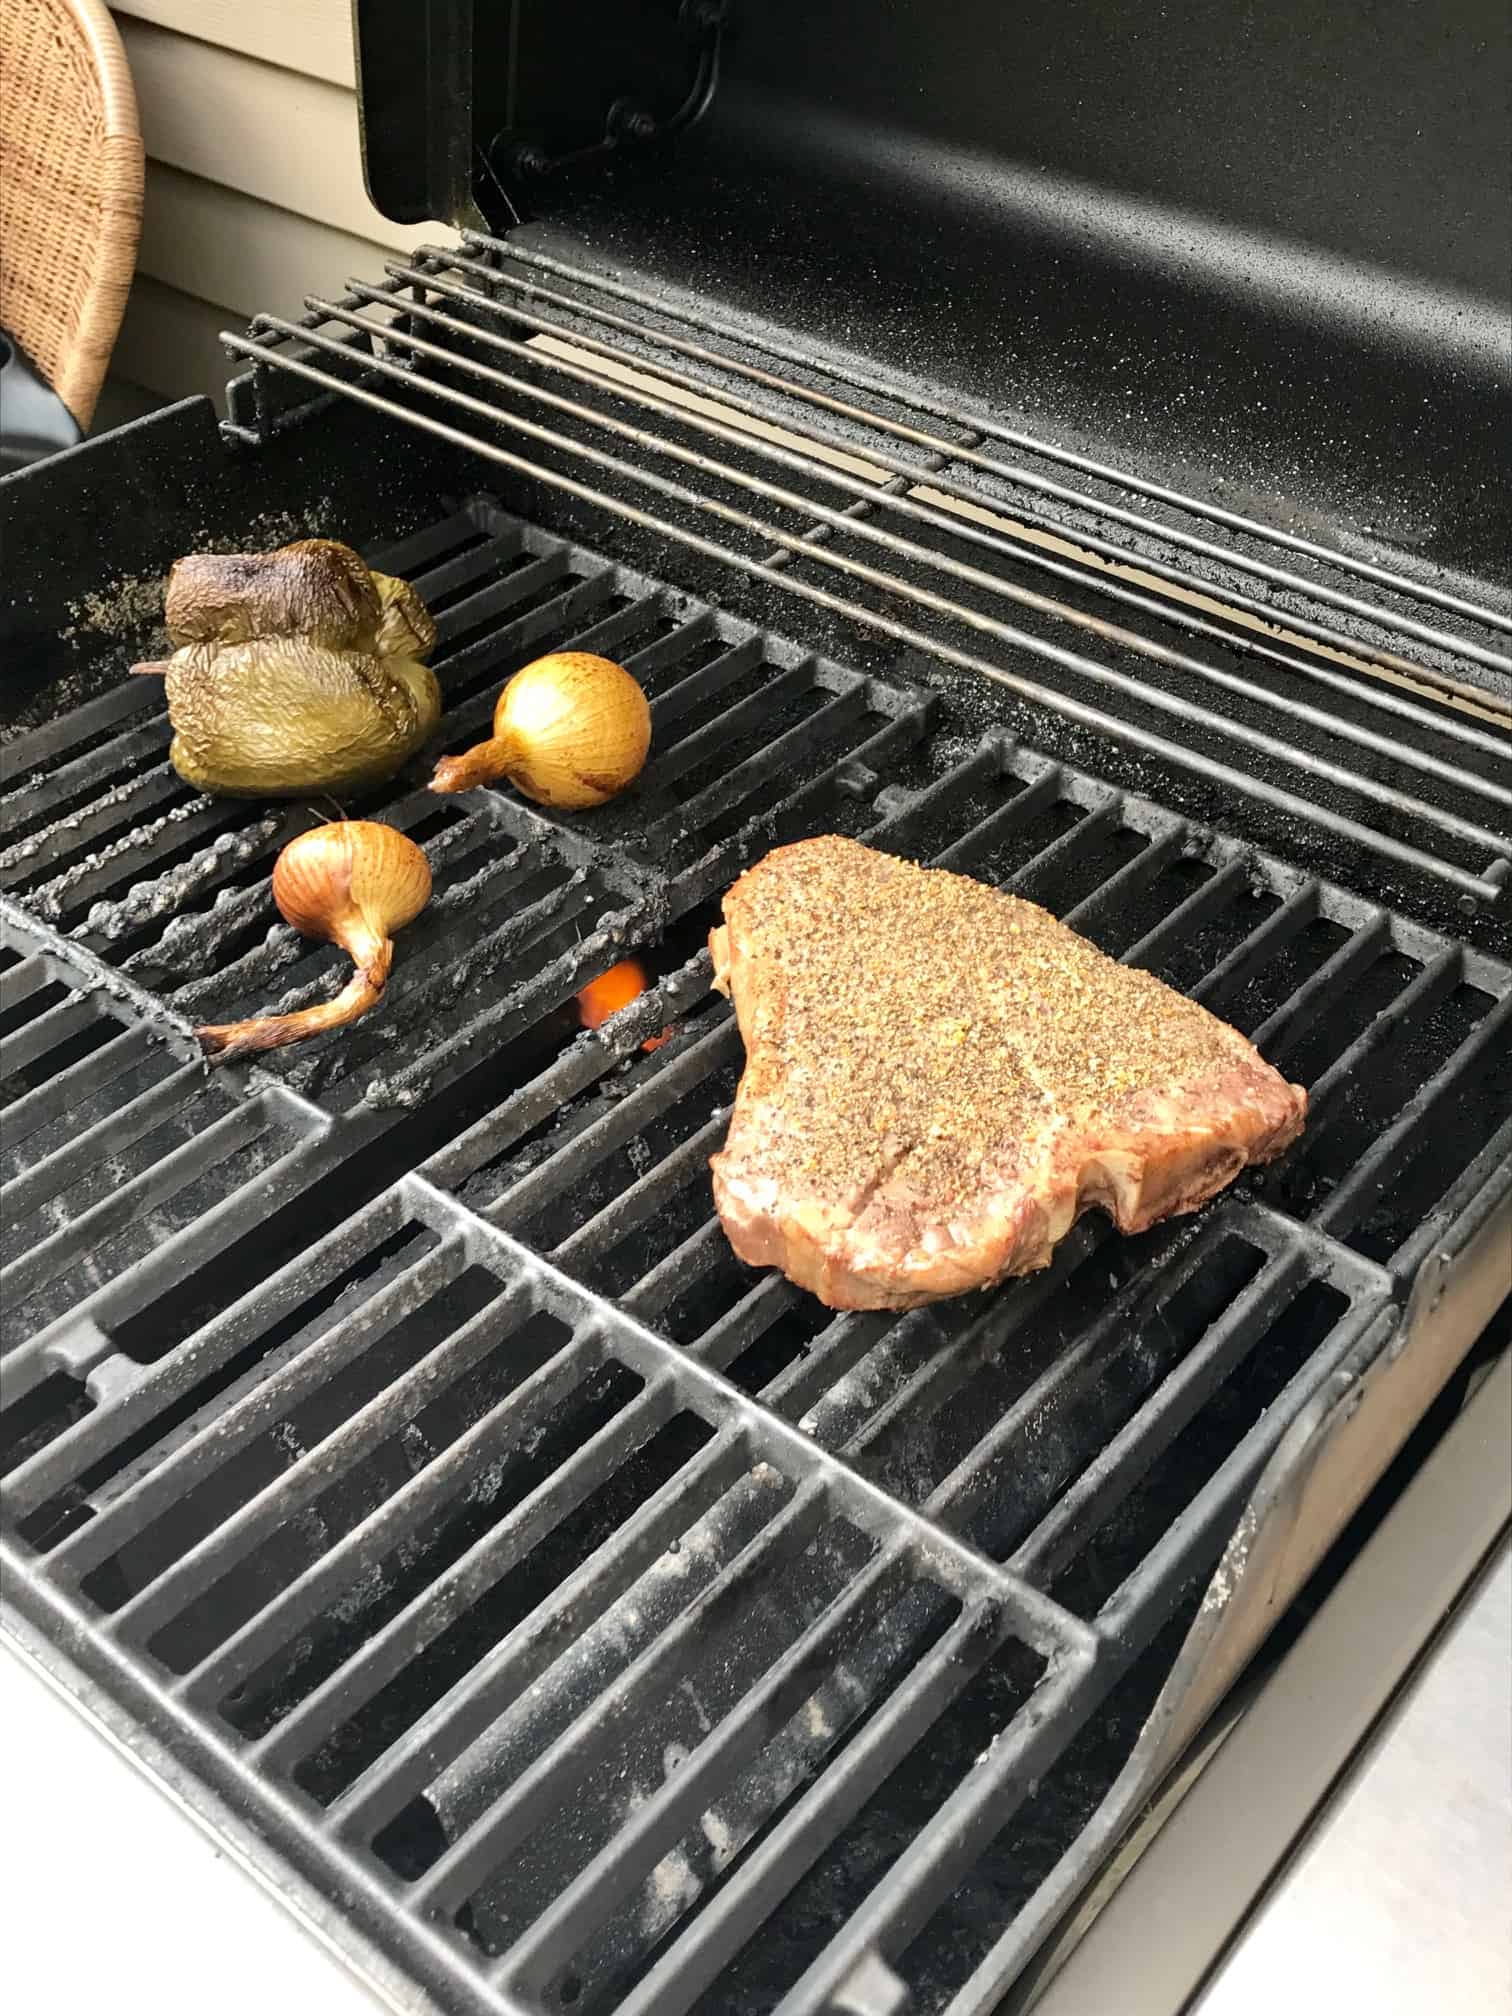 Steak on grill grates side view